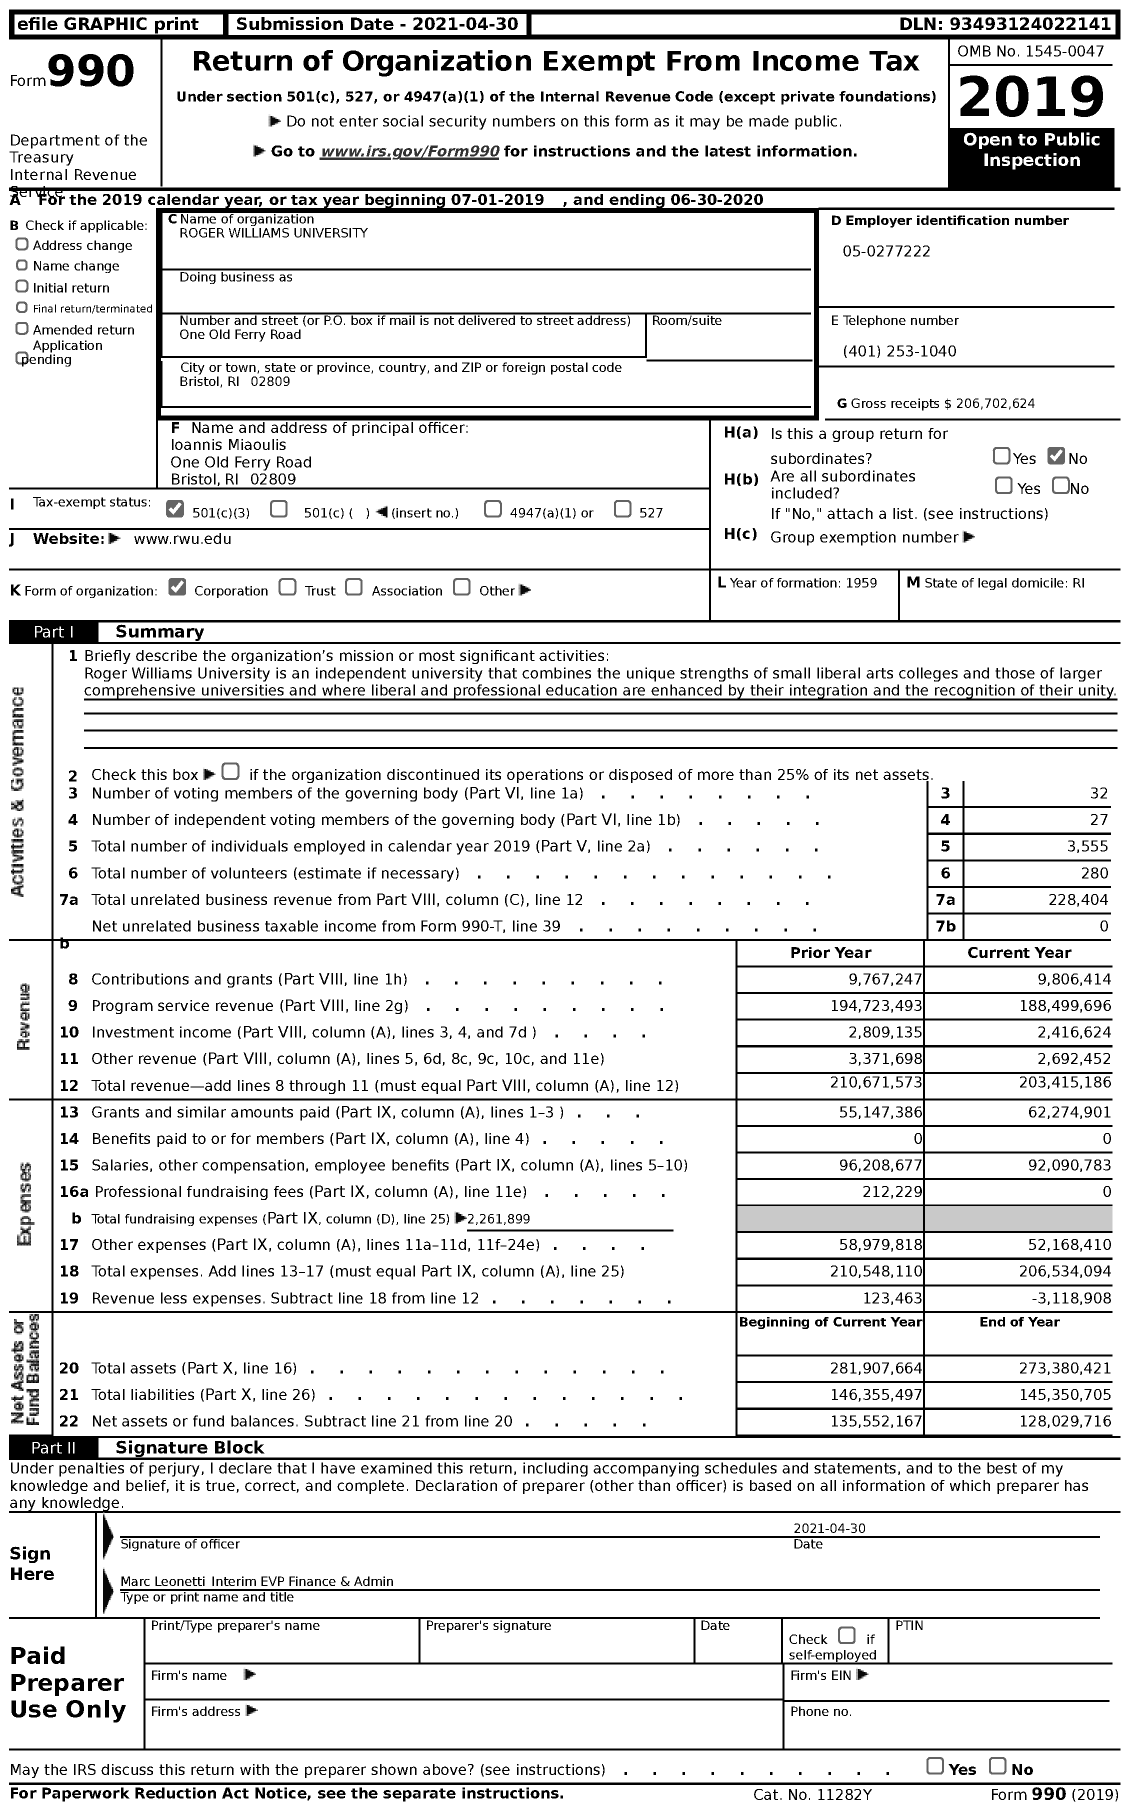 Image of first page of 2019 Form 990 for Roger Williams University (RWU)